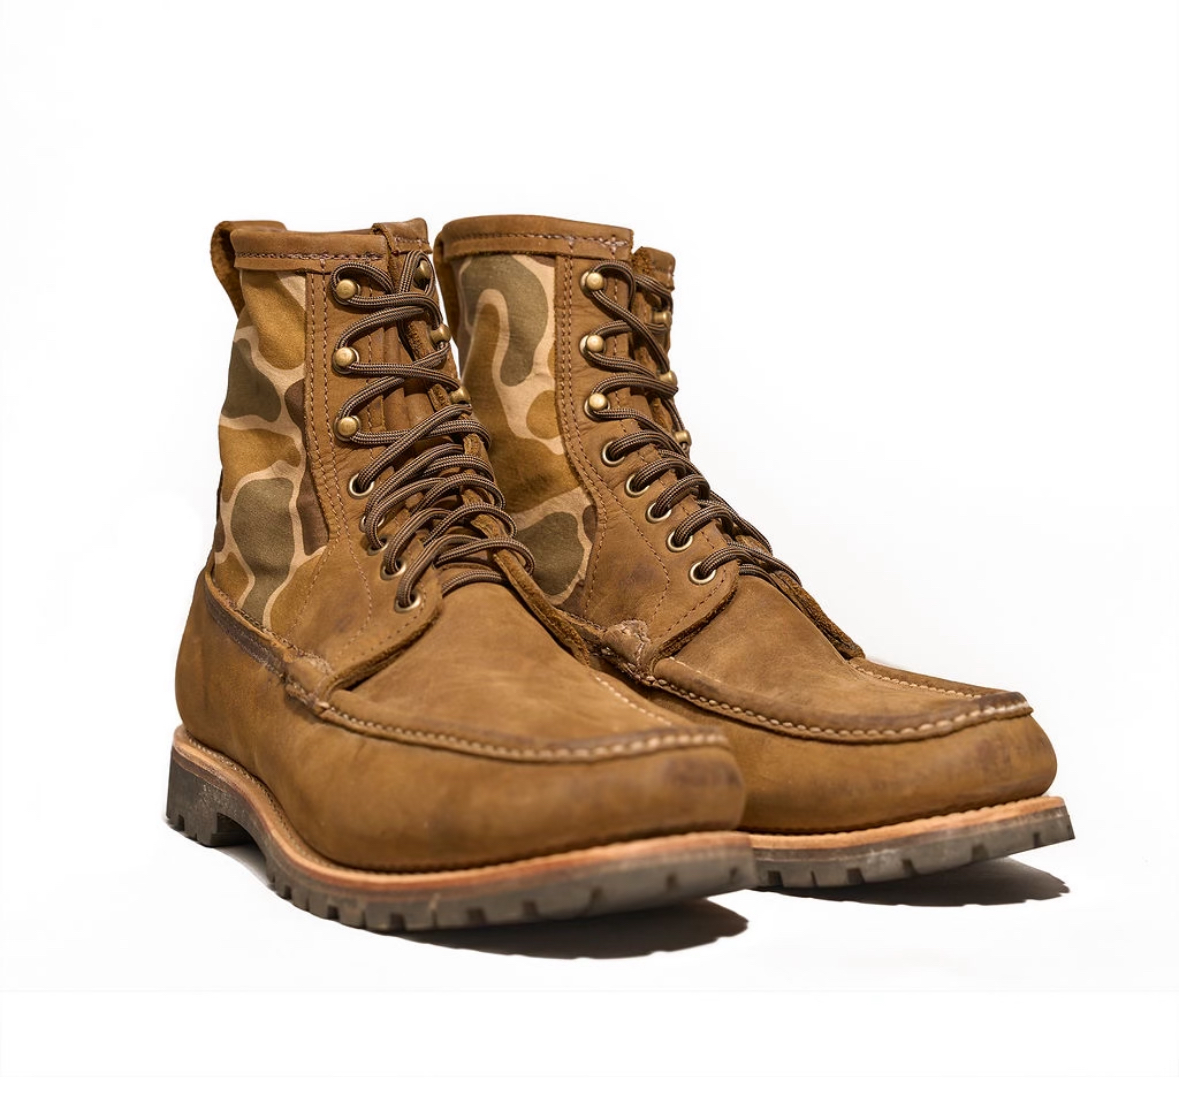 Now Available: The Sporting Gent X Russell Moccasin Backcountry Oxbow Boots